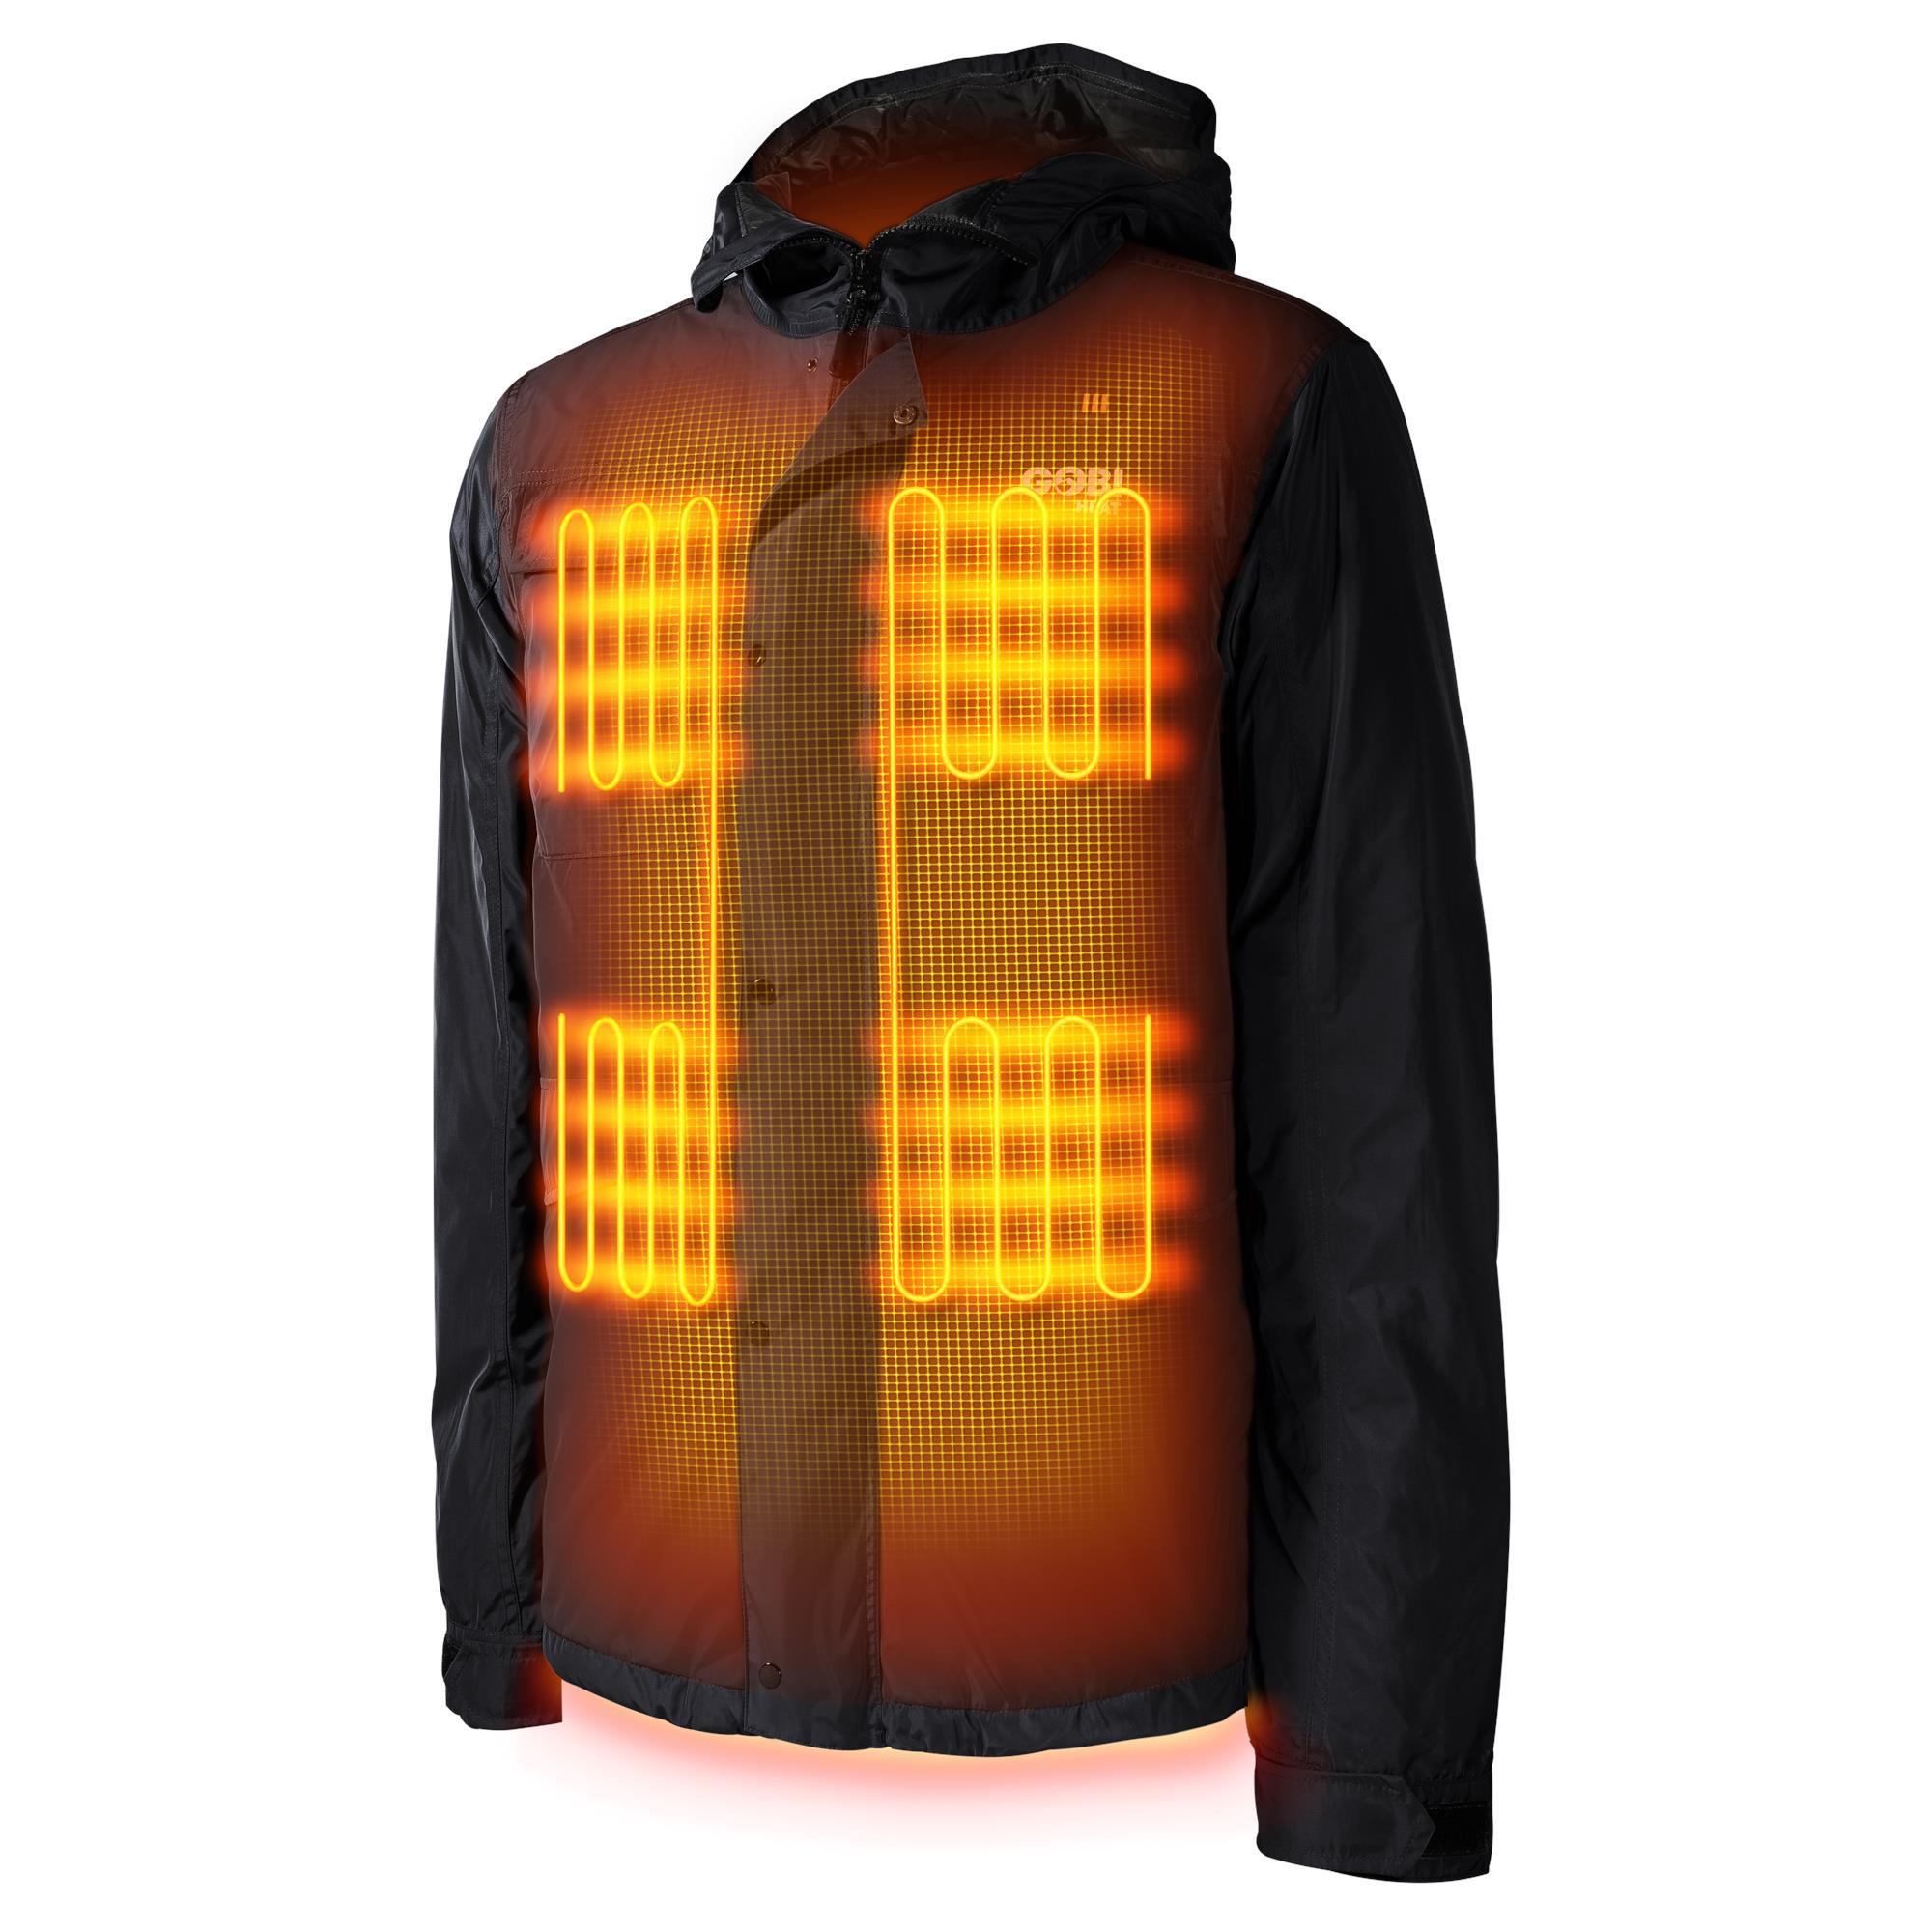 Heated Jacket For Men with Battery Pack Included